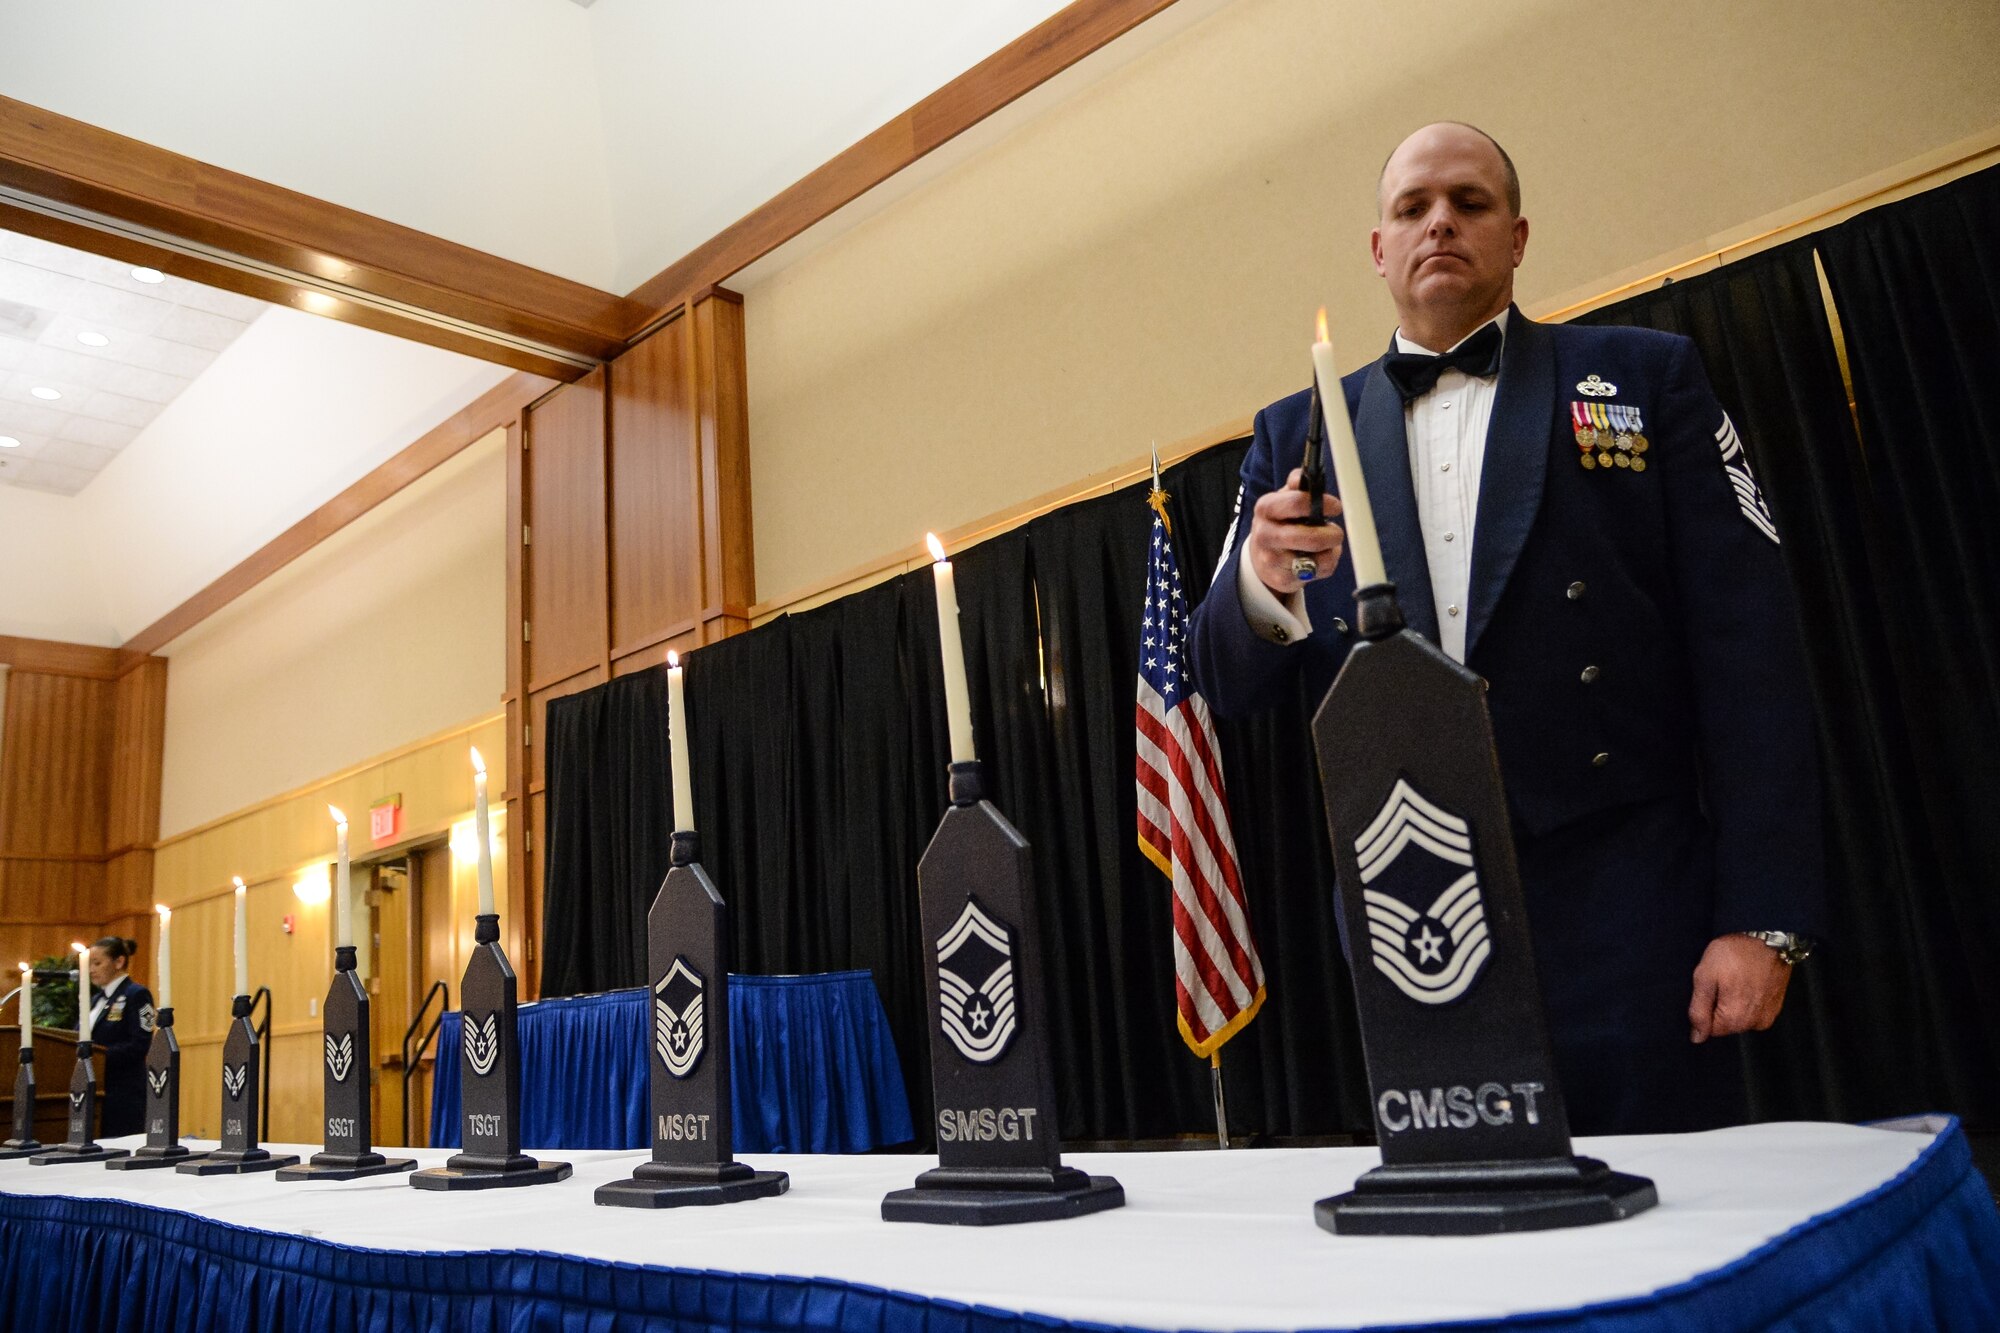 Utah Air National Guard Command Chief Master Sergeant Michael Edwards lights a candle representing the rank of chief master sergeant during the Chief’s Recognition Ceremony at Hill Air Force Base, Utah, March 4, 2016. (U.S. Air Force photo by R. Nial Bradshaw)